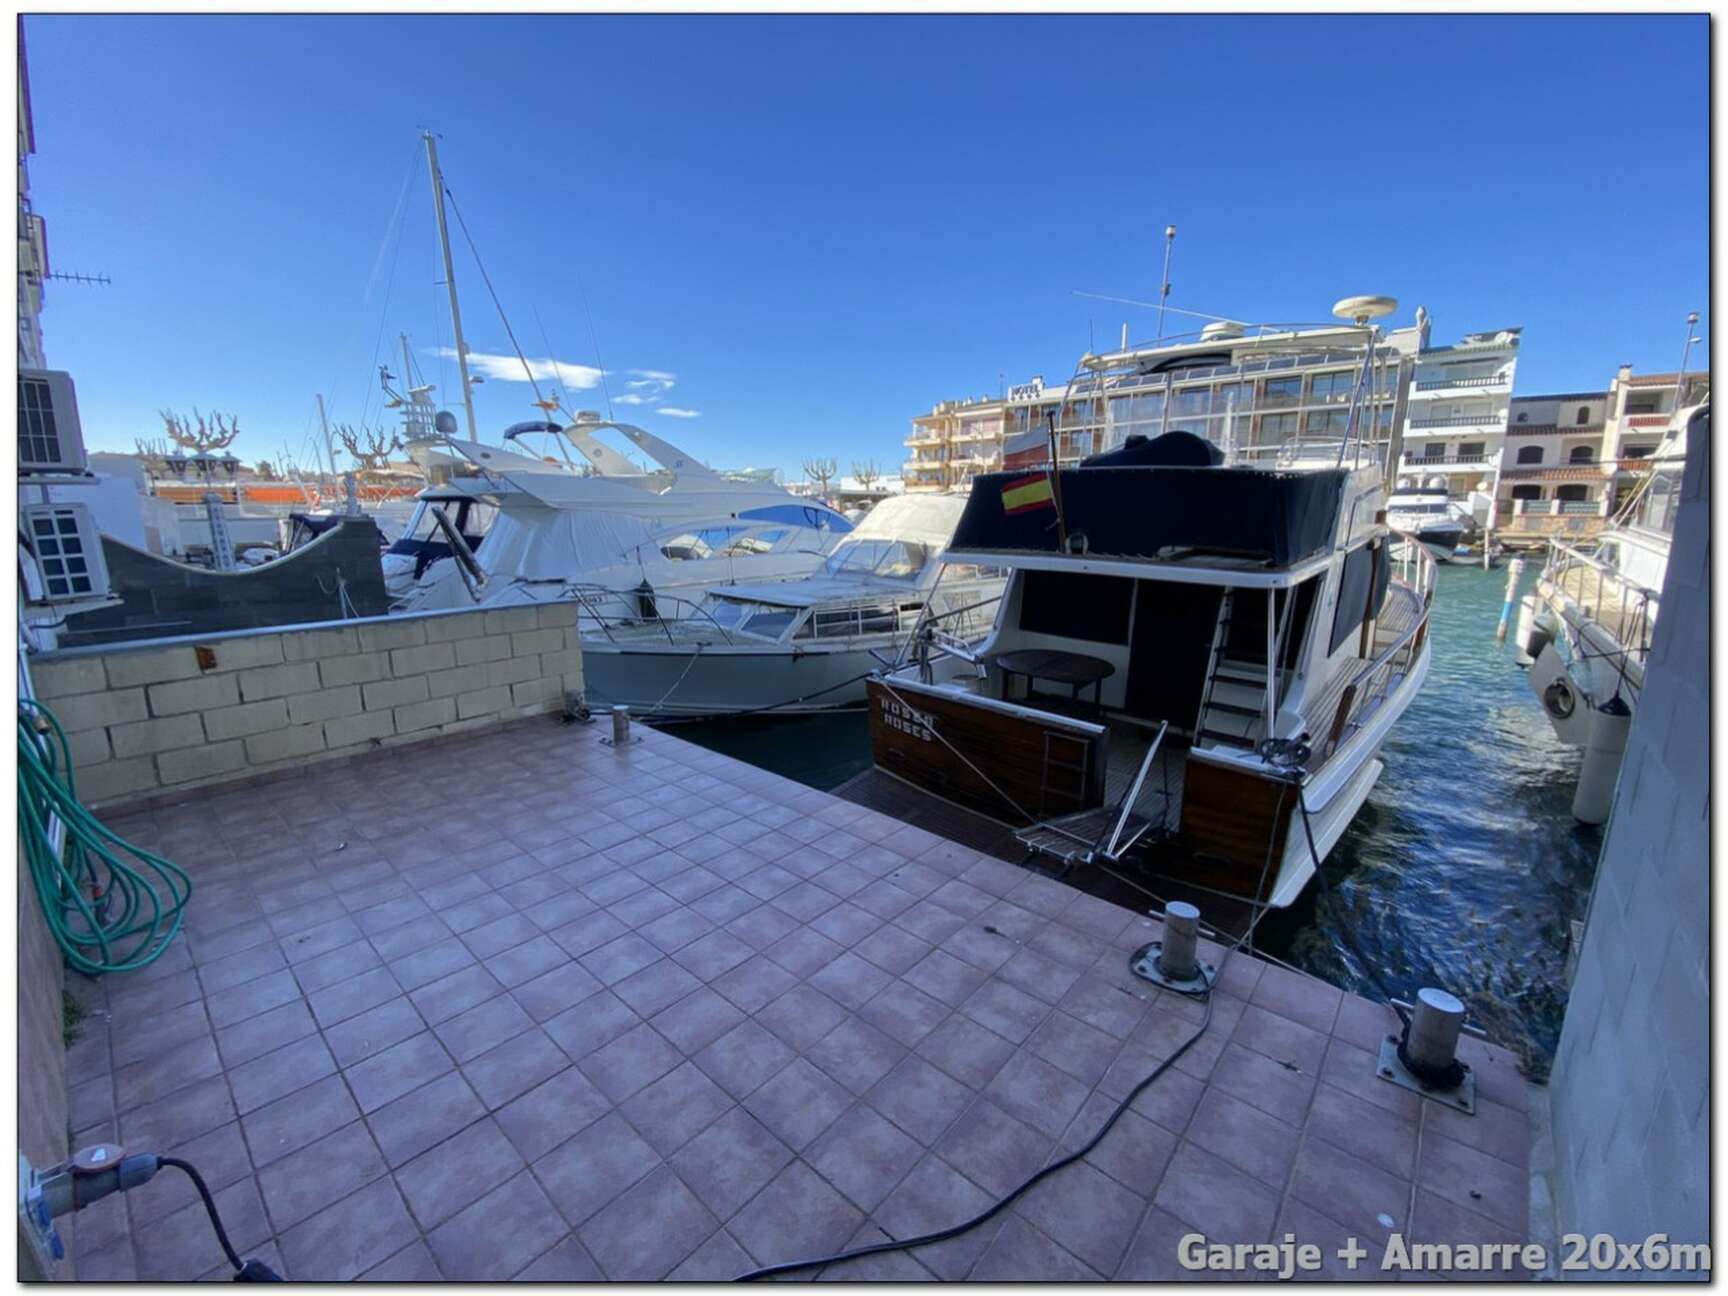 Building for sale Empuriabrava, 3 flats, large garage and mooring of 20x6m.